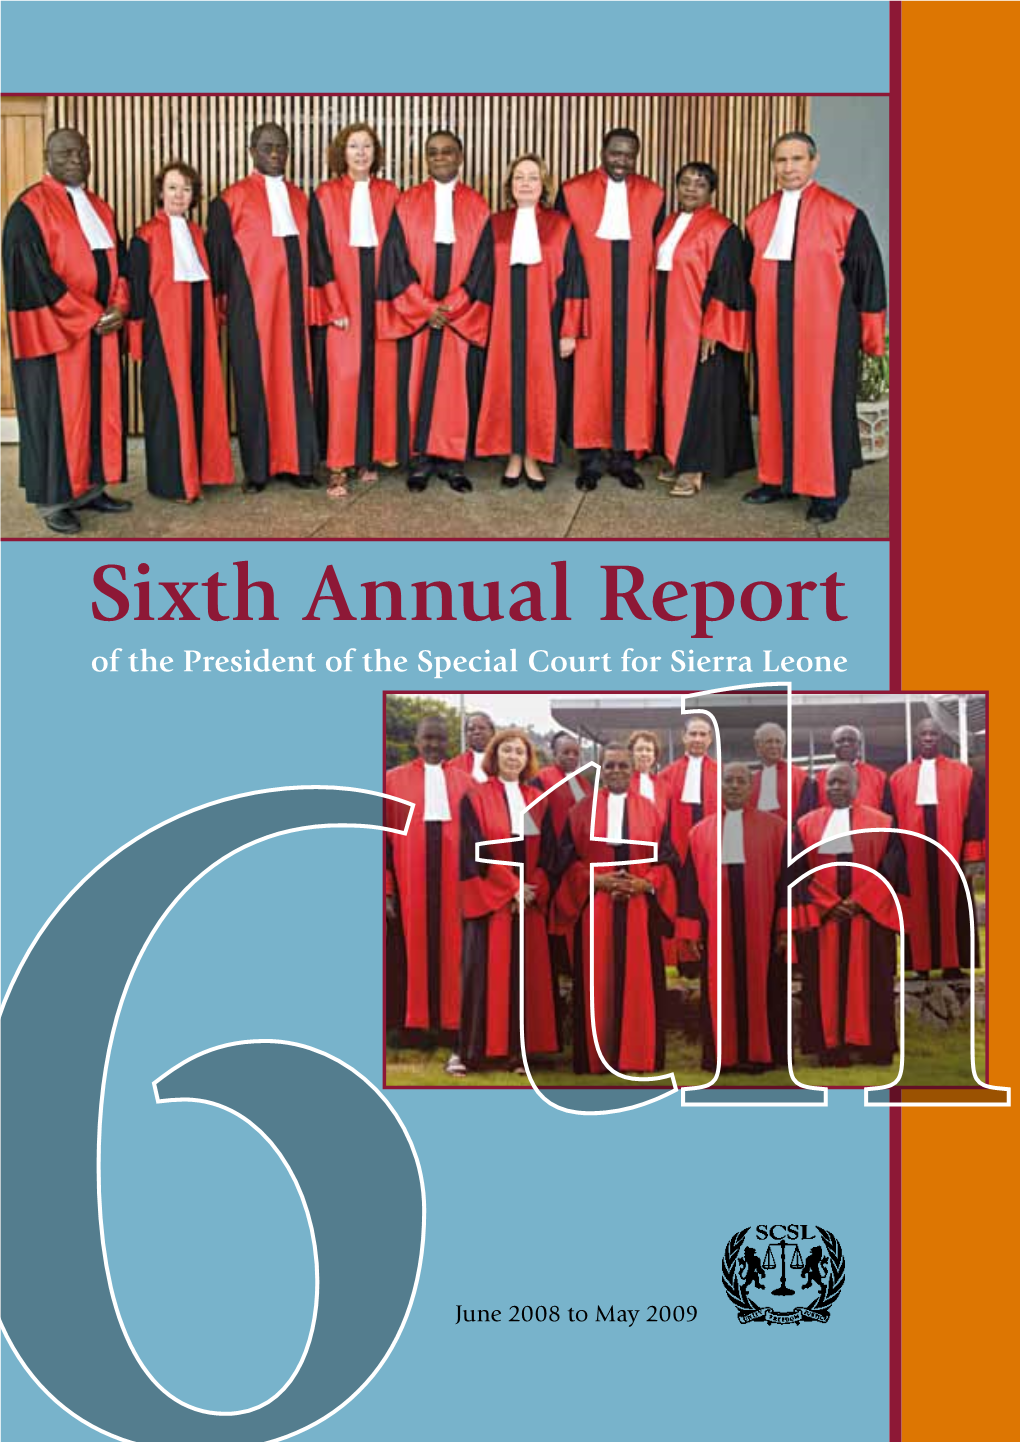 Sixth Annual Report of the President of the Special Court for Sierra Leone